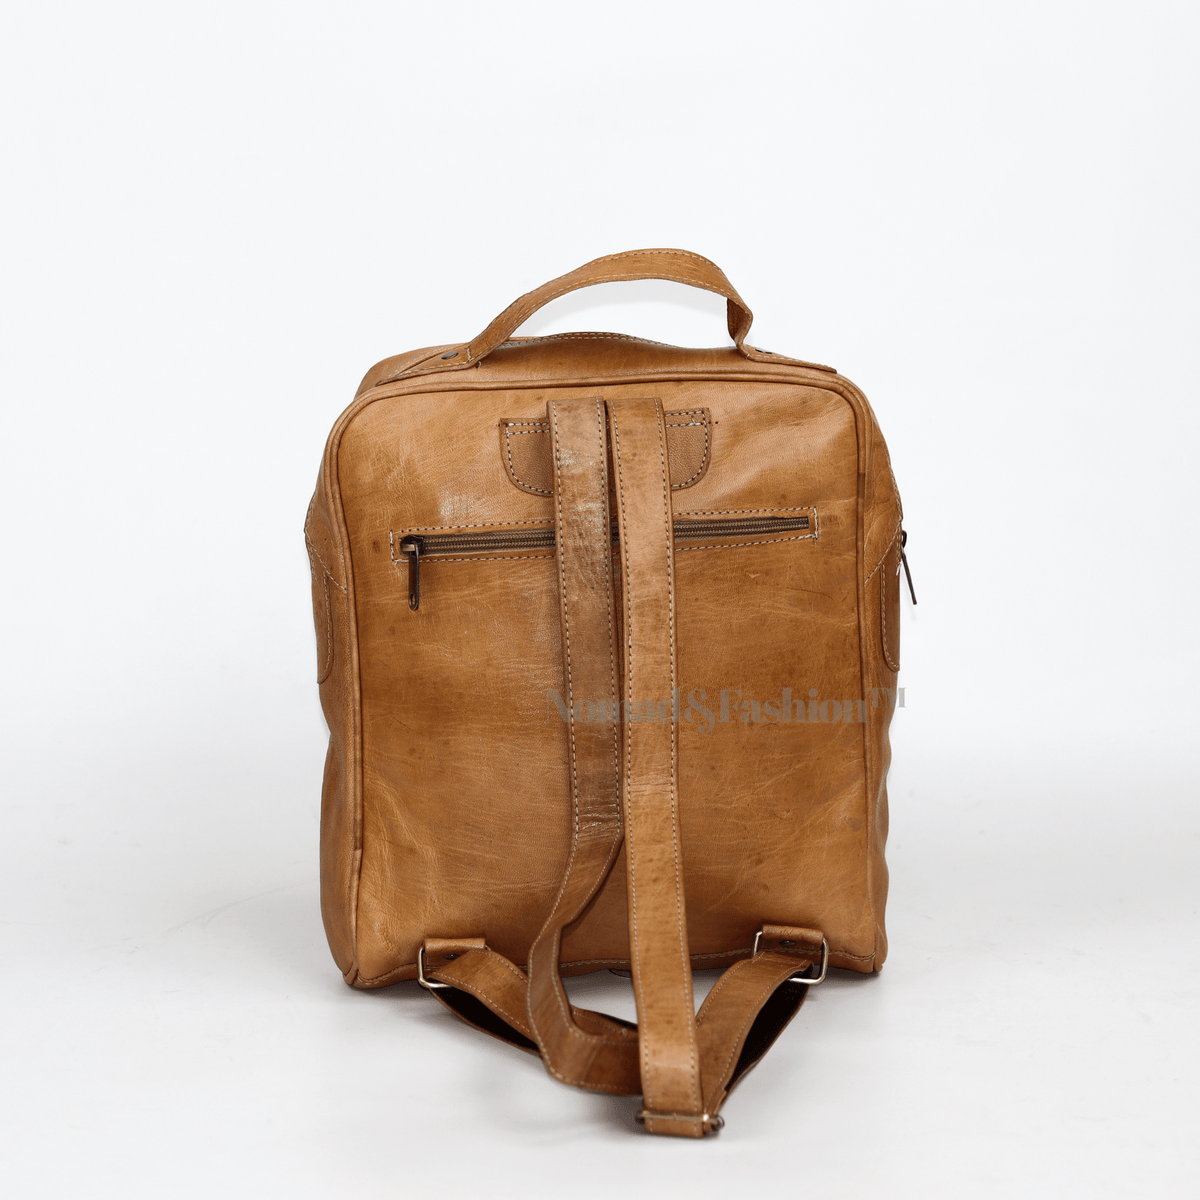 Nomad Trailblazer Leather Backpack for Hiking and outdoor